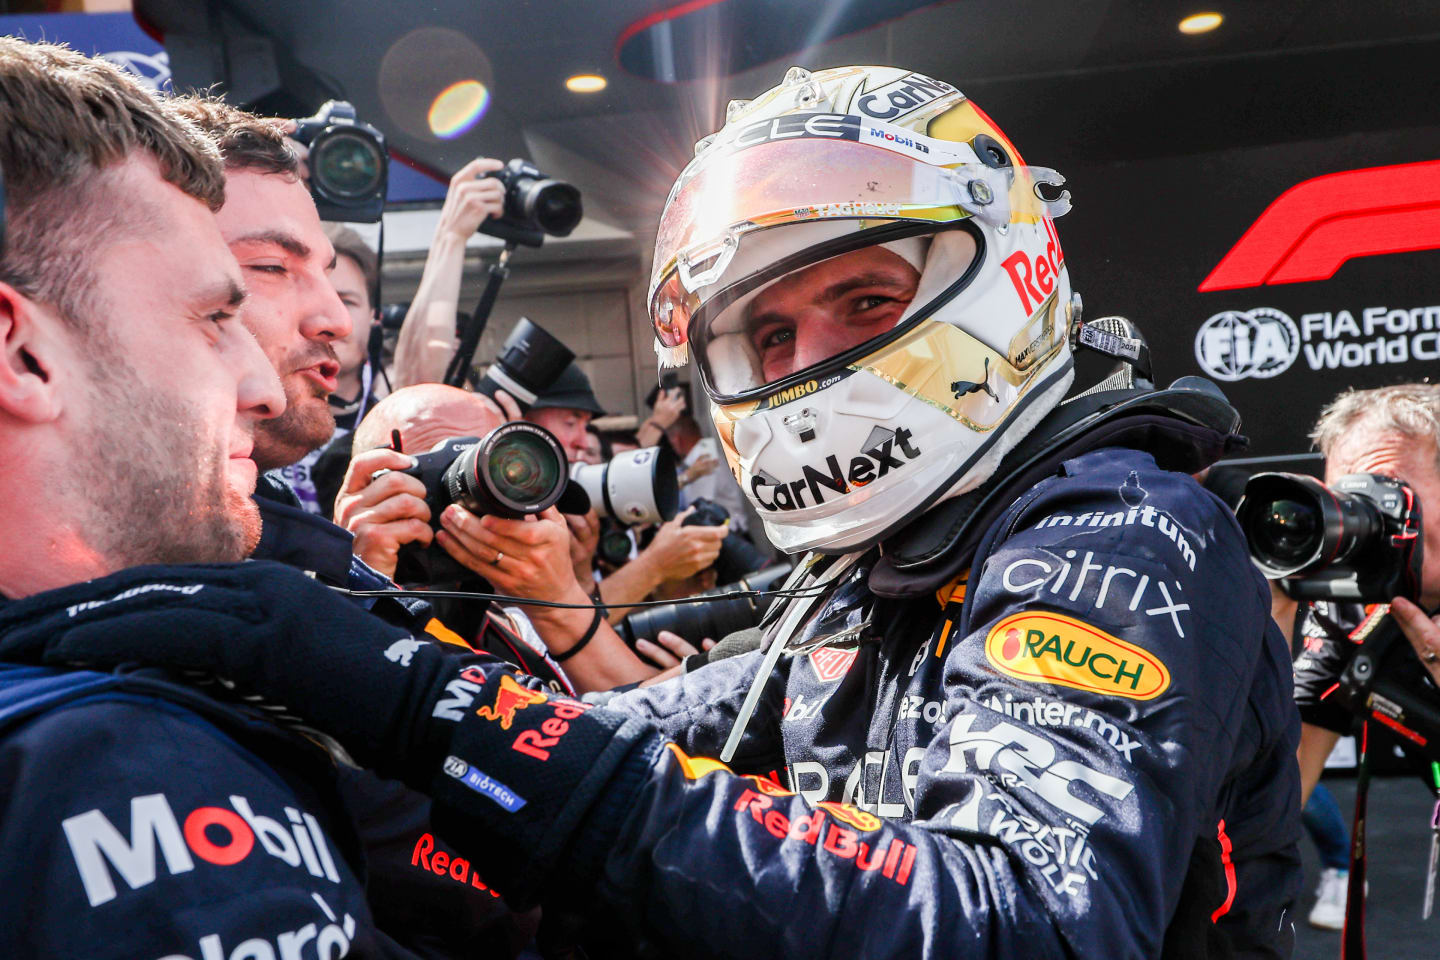 BARCELONA, SPAIN - MAY 22: Max Verstappen of Red Bull Racing and The Netherlands celebrates finishing in first position during the F1 Grand Prix of Spain at Circuit de Barcelona-Catalunya on May 22, 2022 in Barcelona, Spain. (Photo by Peter Fox/Getty Images)